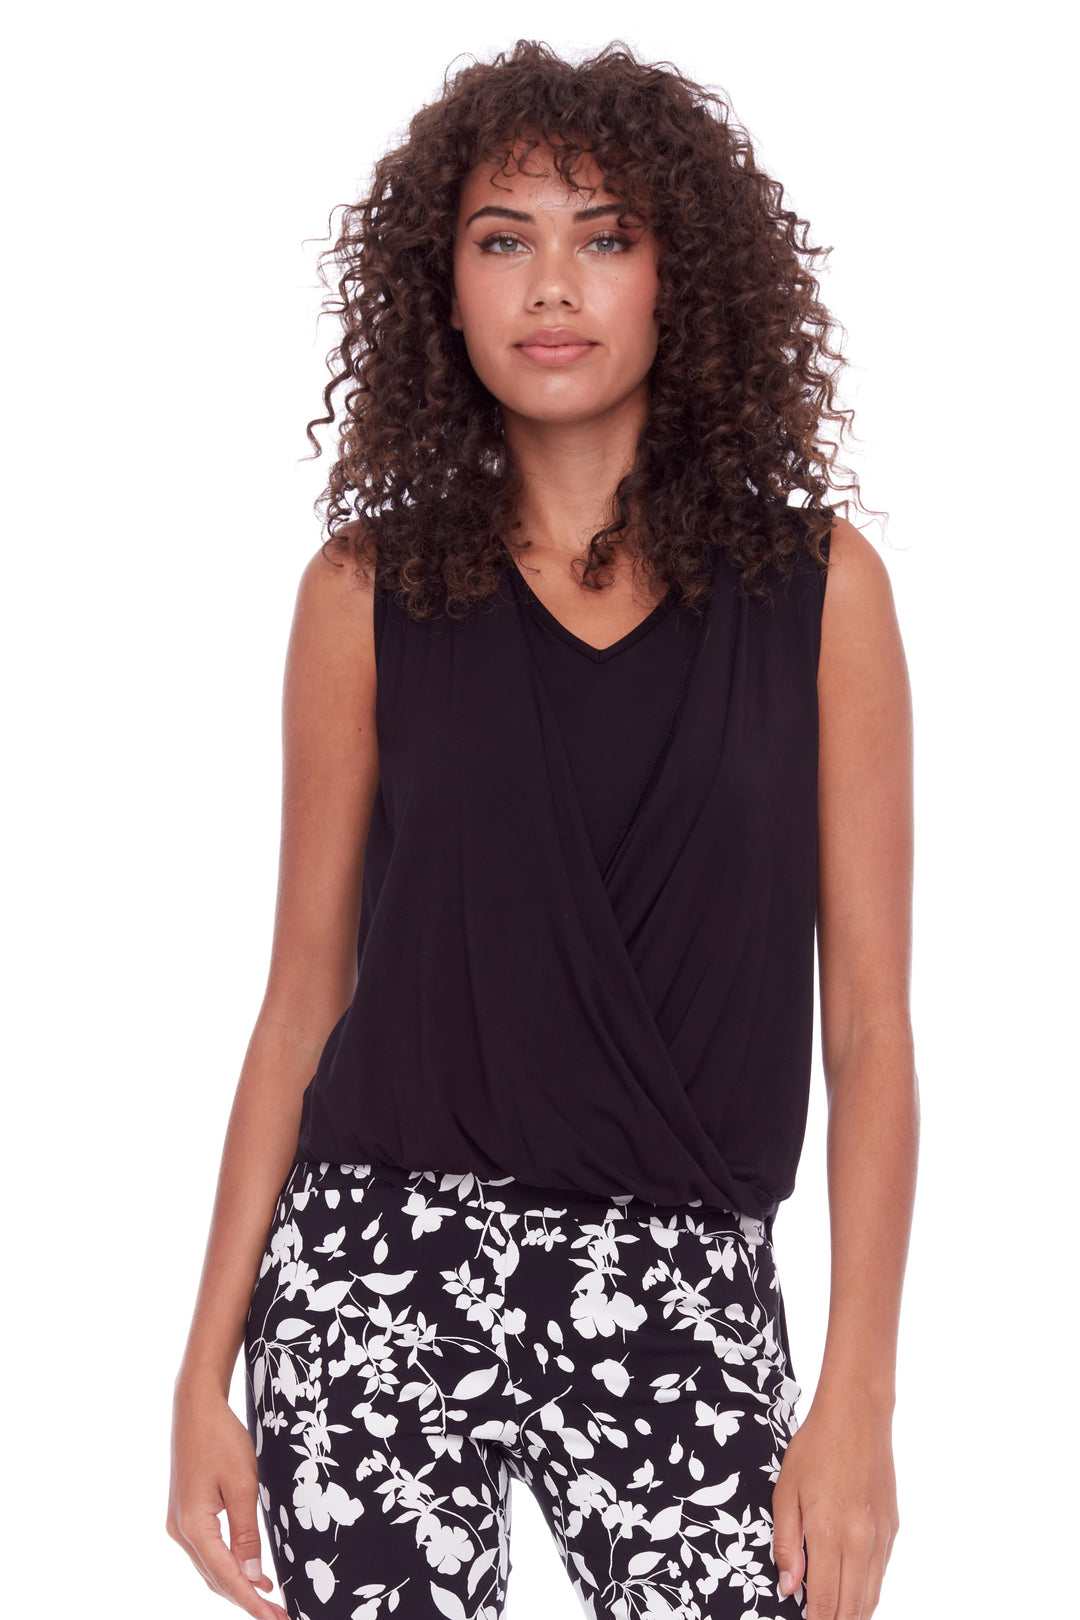 UP! Womens Top 30336